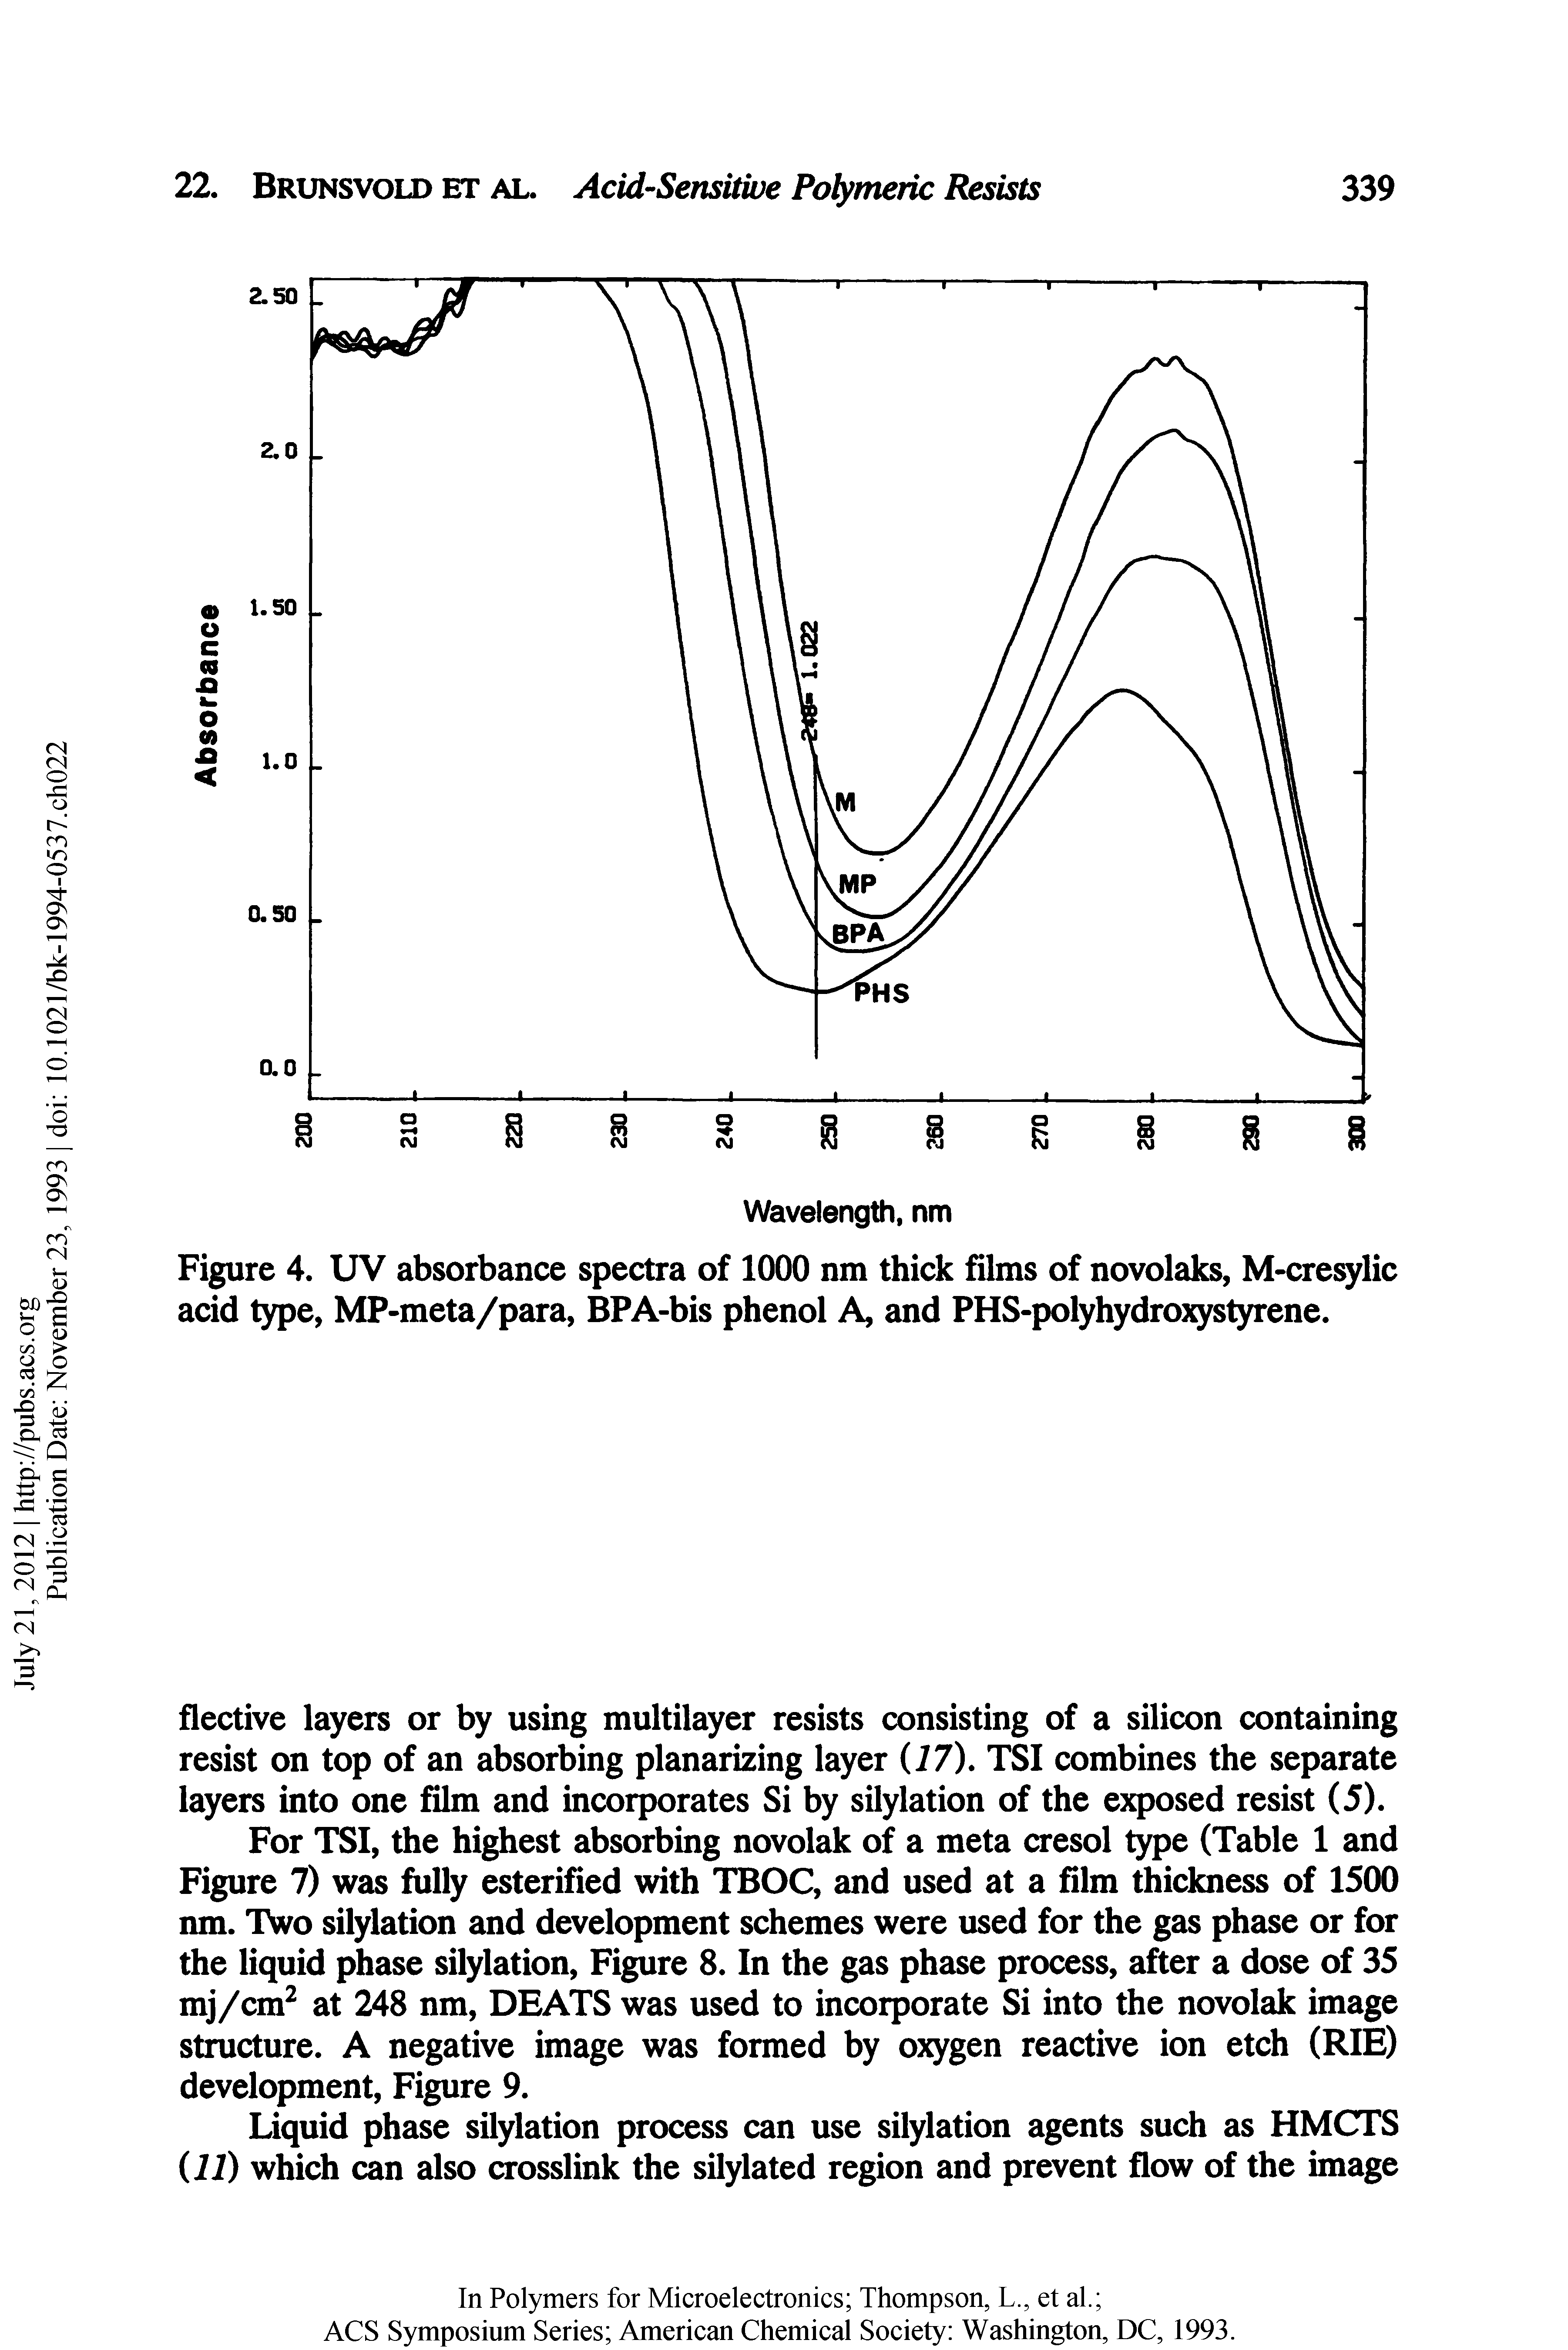 Figure 4. UV absorbance spectra of 1000 nm thick films of novolaks, M-cre lic acid type, MP-meta/para, BPA-bis phenol A, and PHS-polyhydro) styrene.